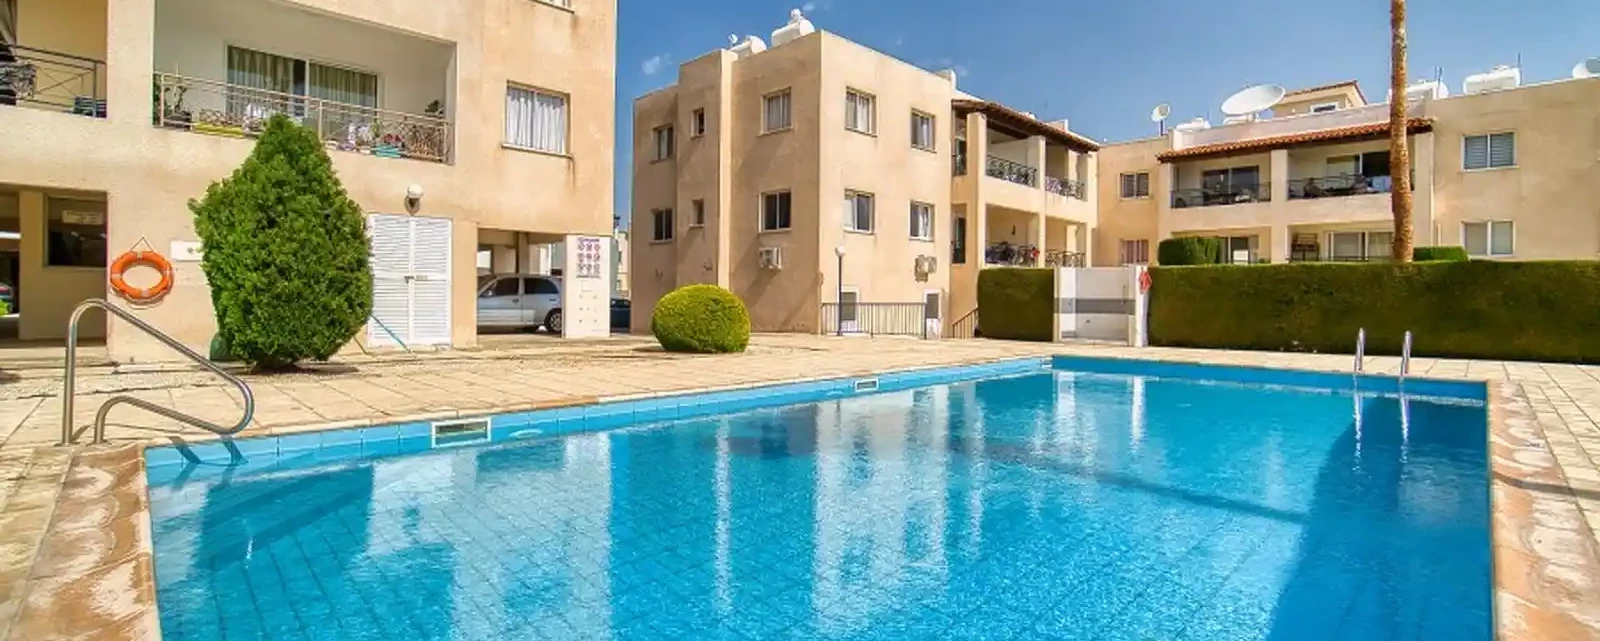 2-bedroom apartment fоr sаle €199.000, image 1